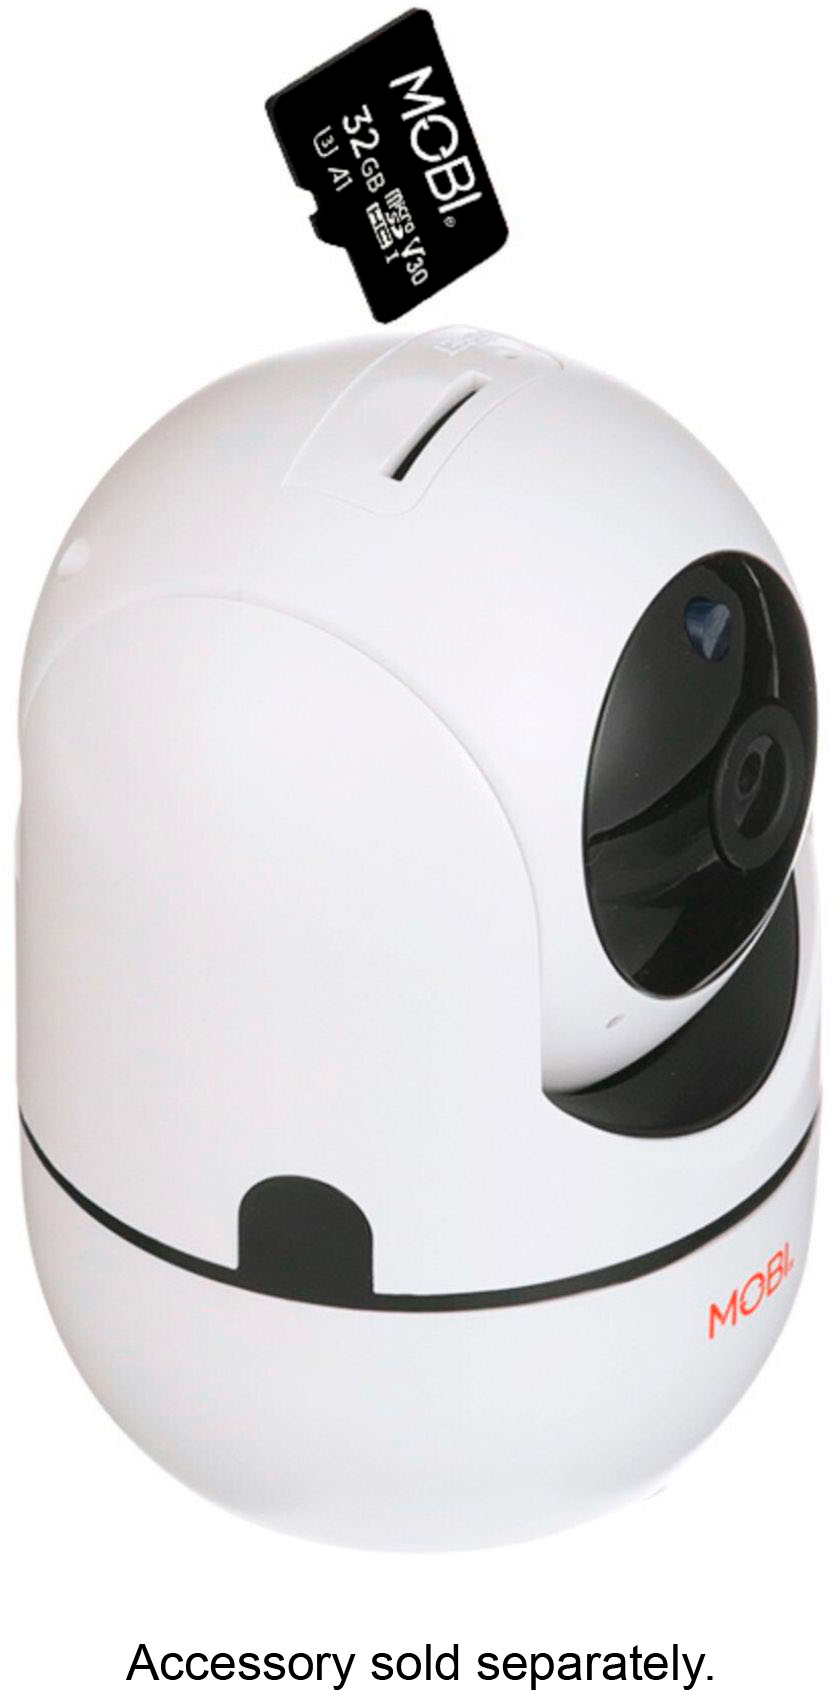 Left View: MOBI - Cam HDX Smart HD Pan & Tilt Wi-Fi Baby Monitoring Camera with 2-way Audio and Powerful Night Vision - White